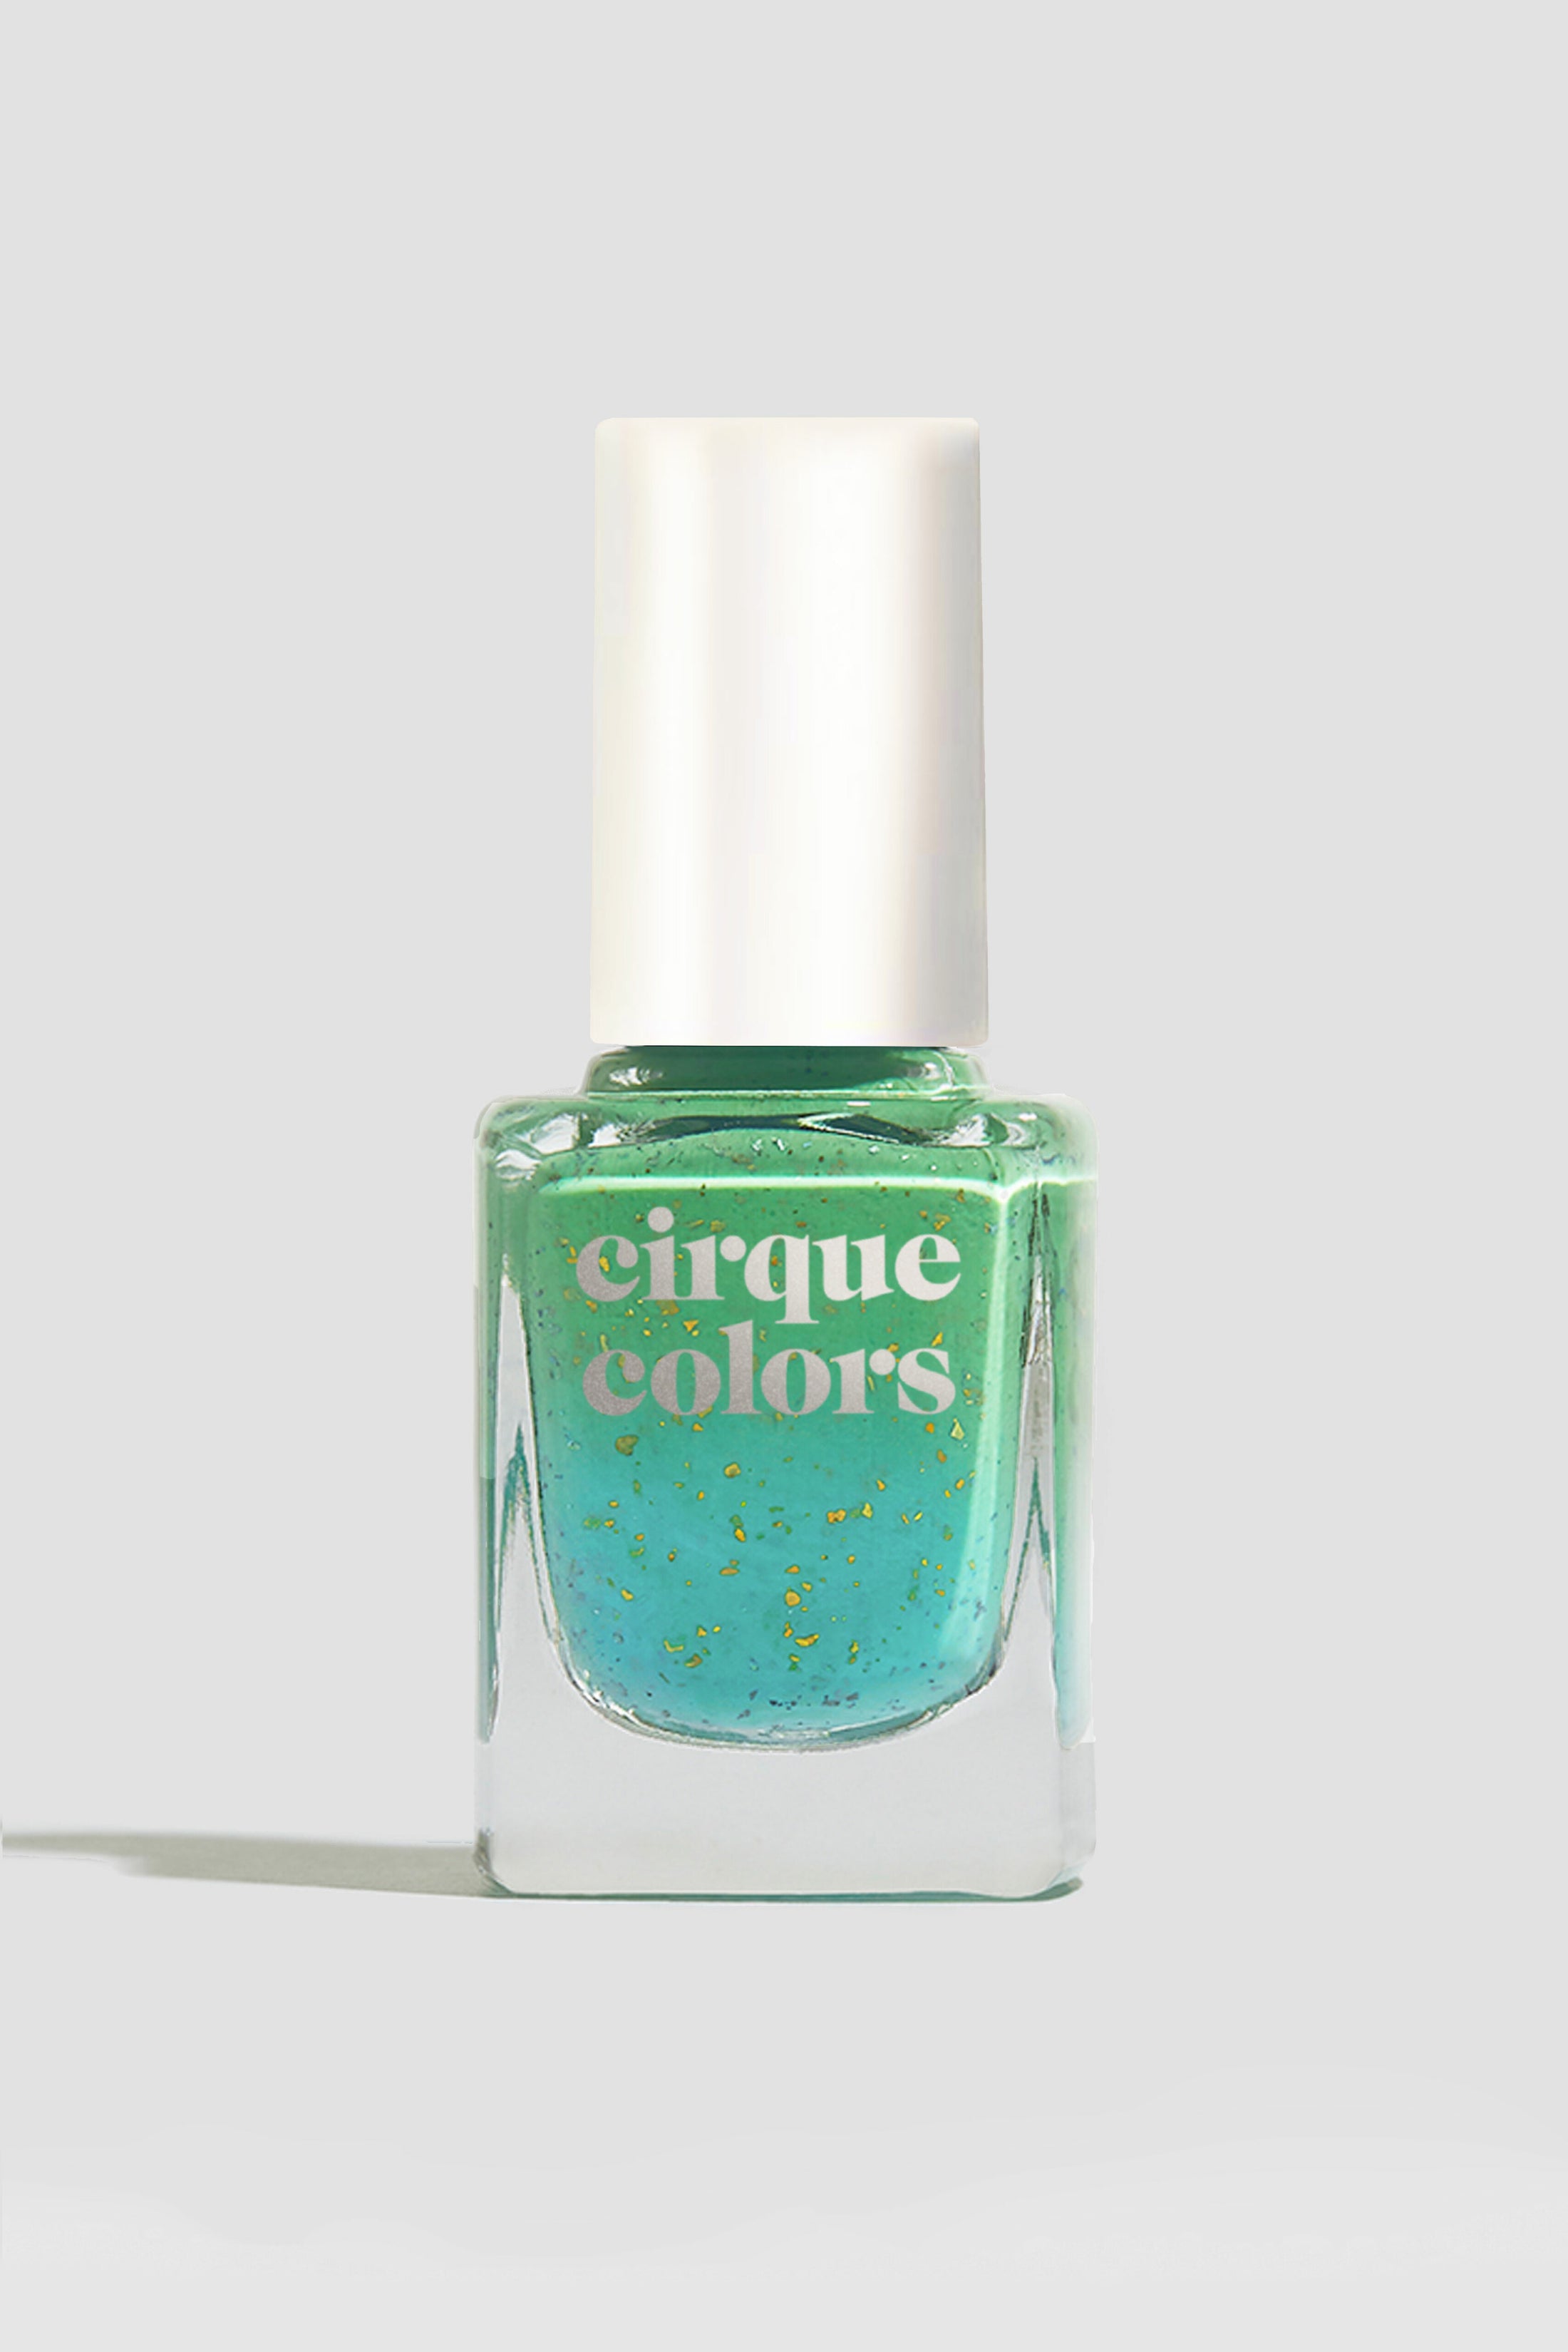 Cirque Colors Thermal Color-Changing Nail Polish – Magic Turquoise